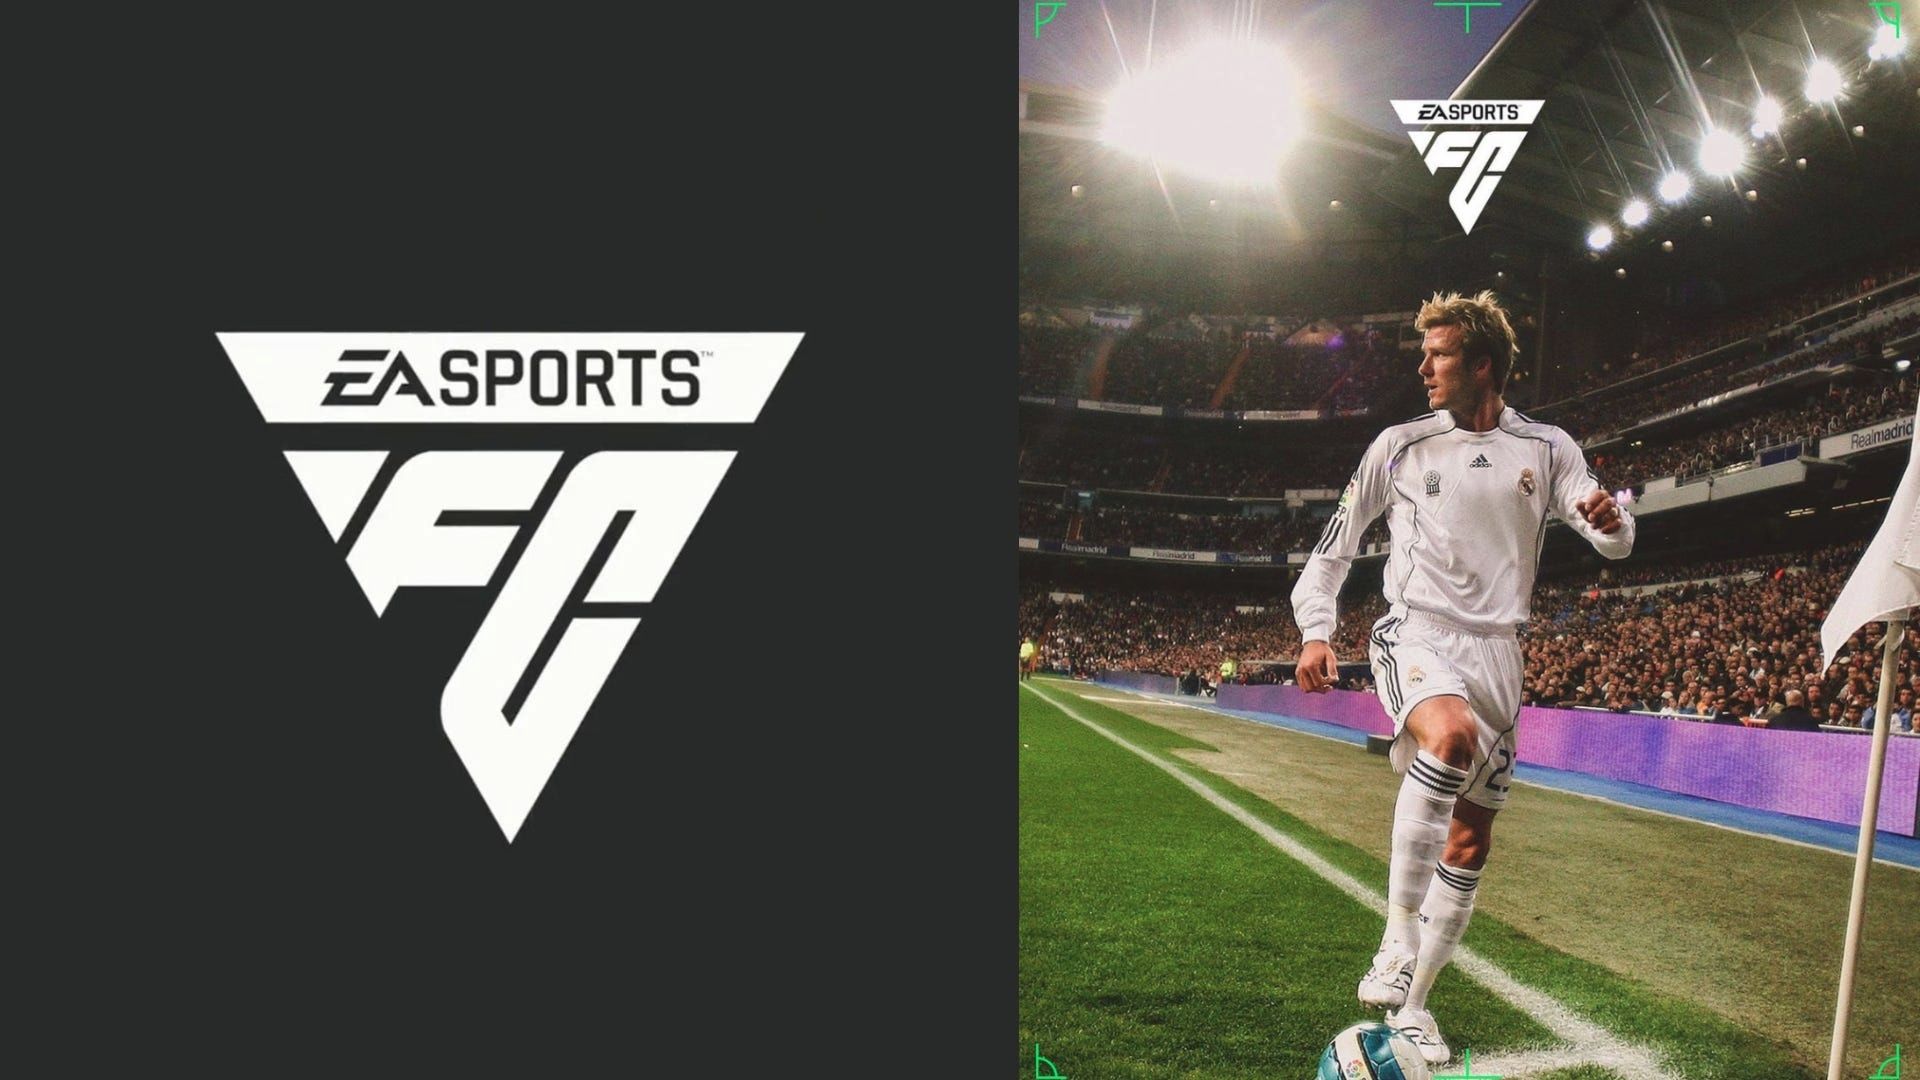 Man City, Liverpool and other top clubs to appear in EA Sports FC